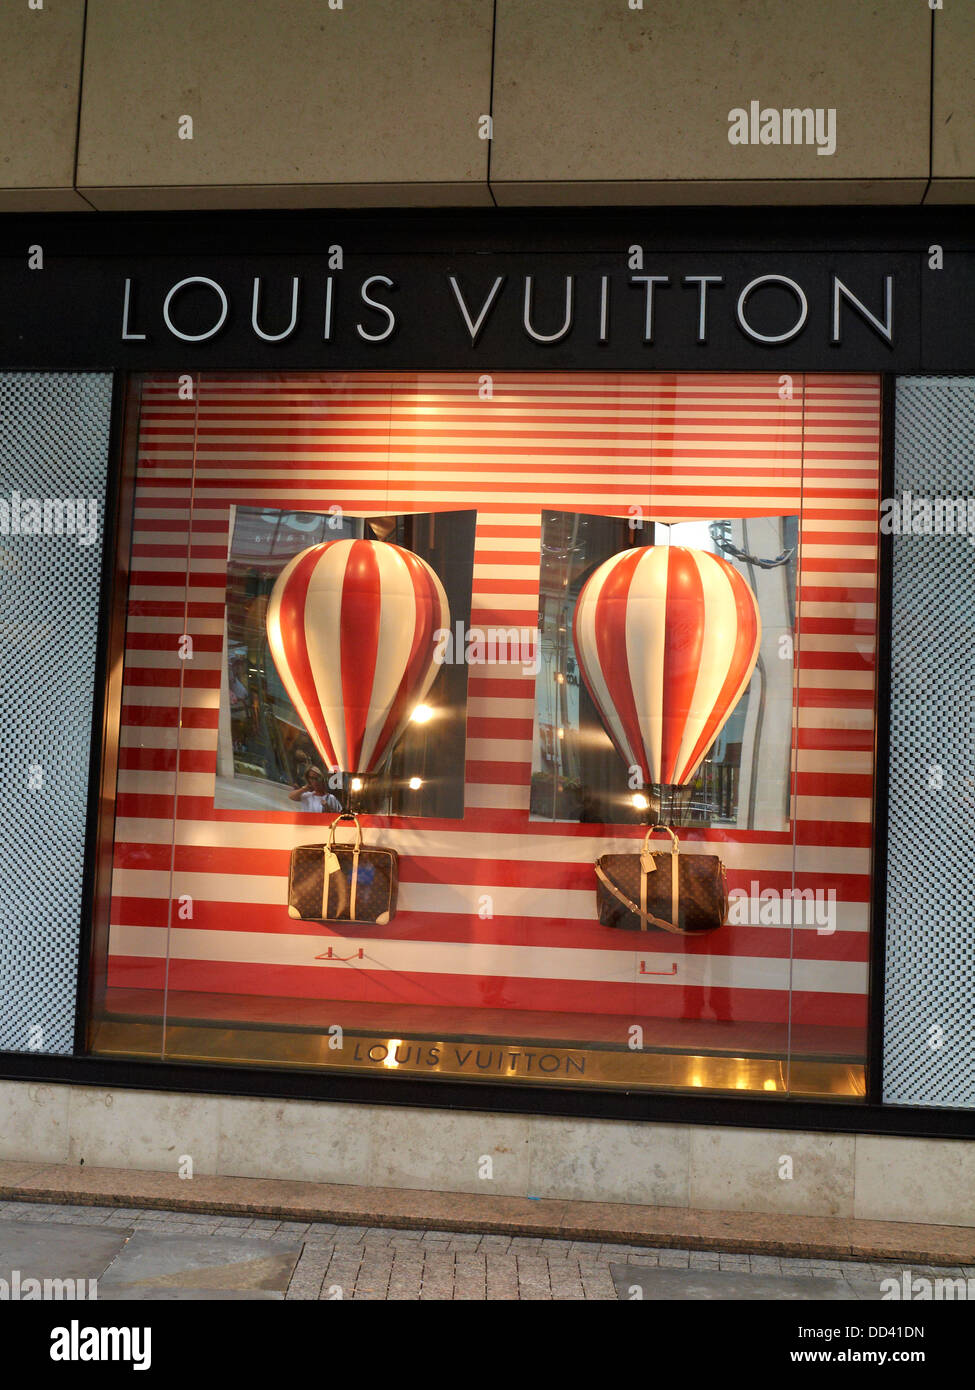 Louis Vuitton window display in New Cathedral Street Manchester UK Stock Photo: 59710609 - Alamy